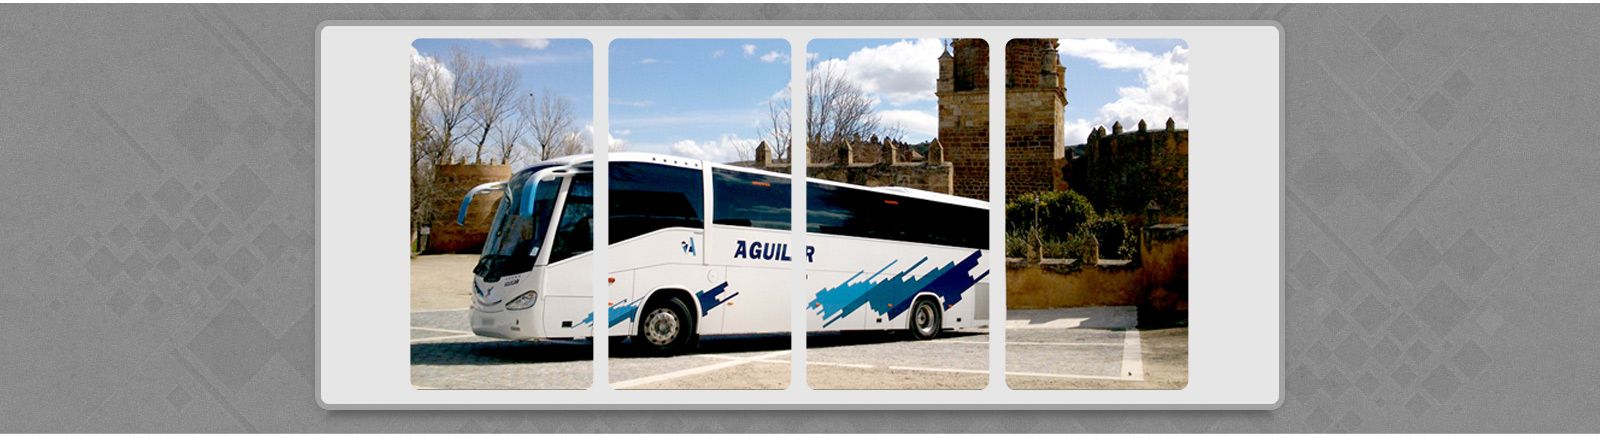 Autobuses Aguilar banner3